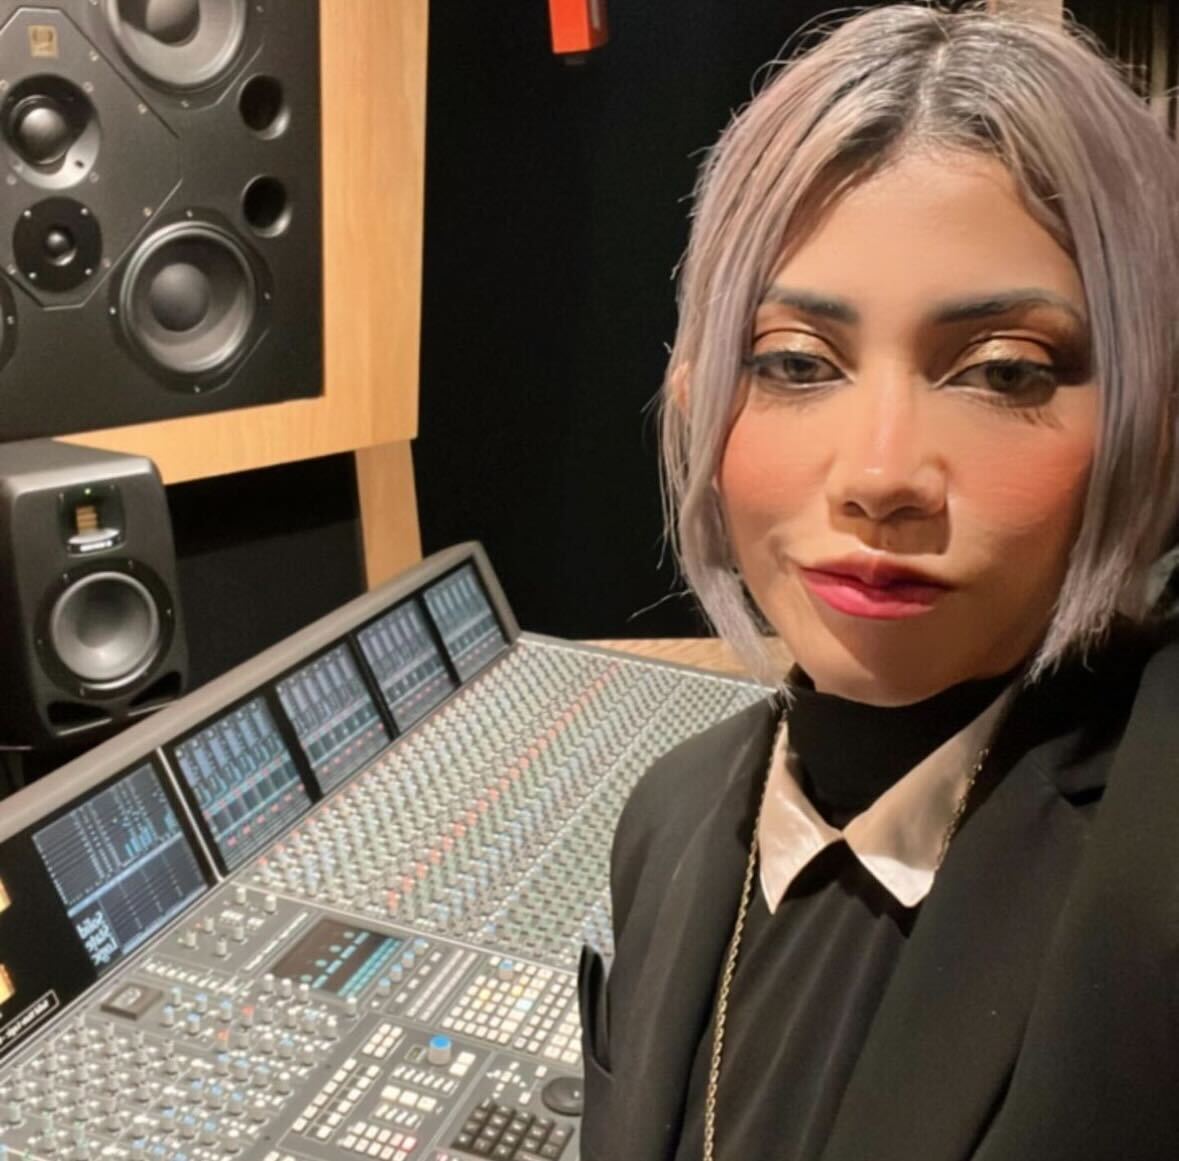 Diana Urquiza, the producer and sound engineer who seeks to make way for girls in music